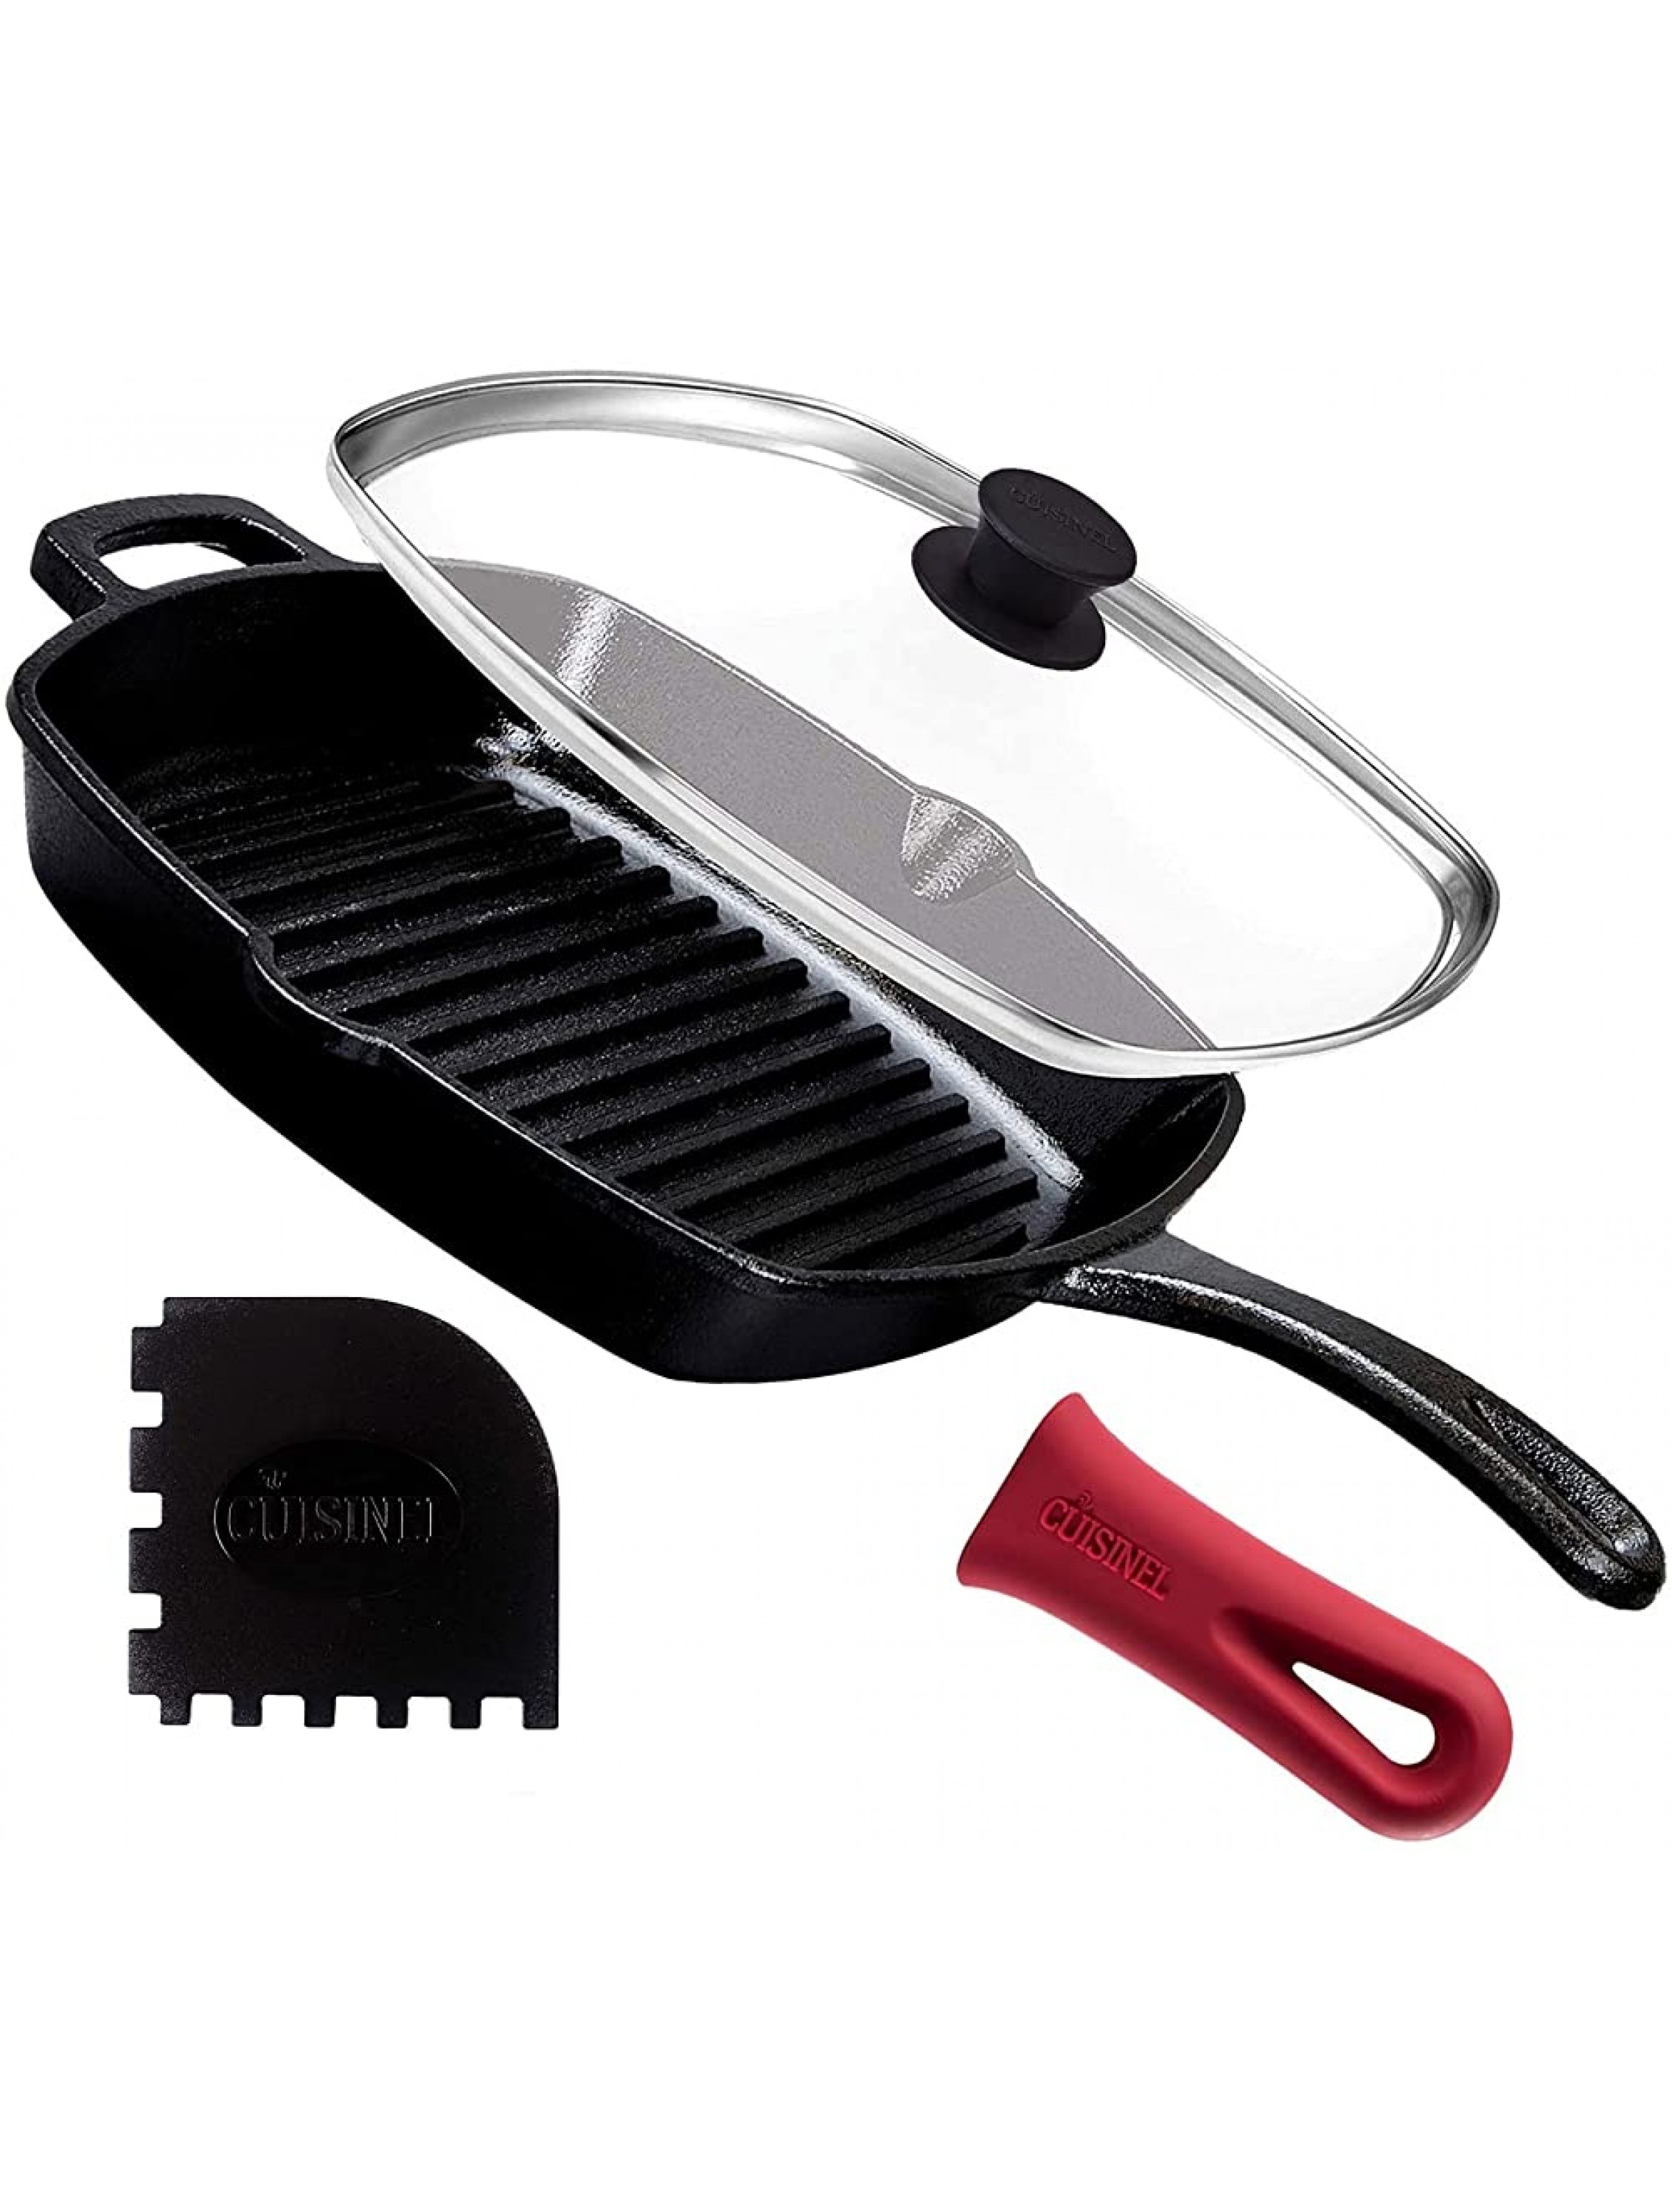 Cast Iron Square Grill Pan with Glass Lid 10.5 Inch Pre-Seasoned Skillet with Handle Cover and Pan Scraper Grill Stovetop Induction Safe Indoor and Outdoor Use for Grilling Frying Sauteing - BMGPE9HV8